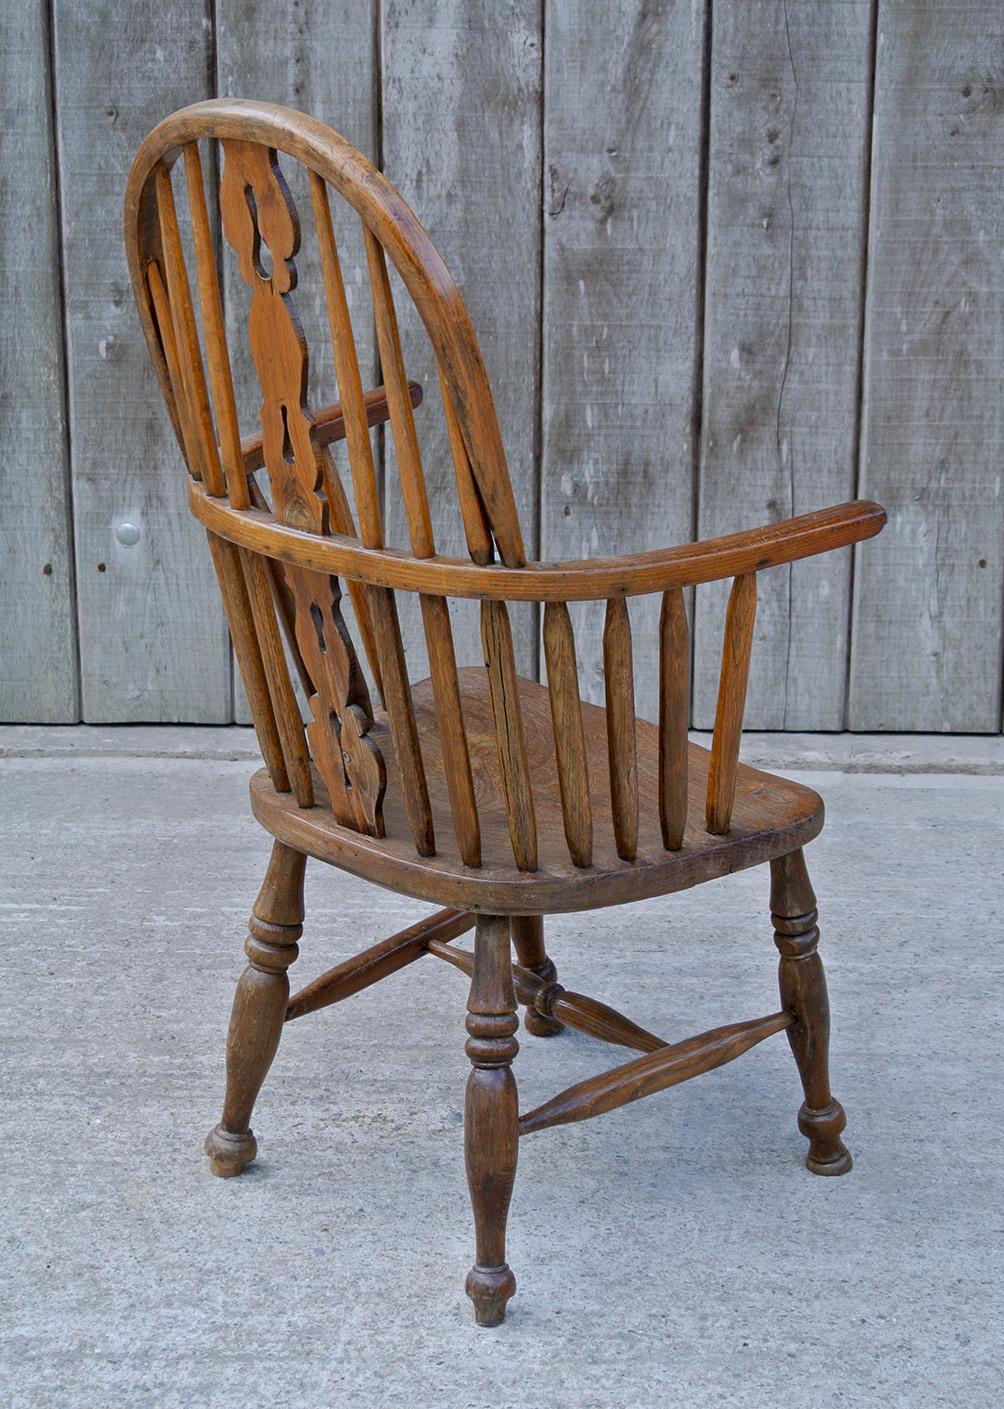 Primitive 19th Century Yew and Ash Windsor Chair For Sale 4